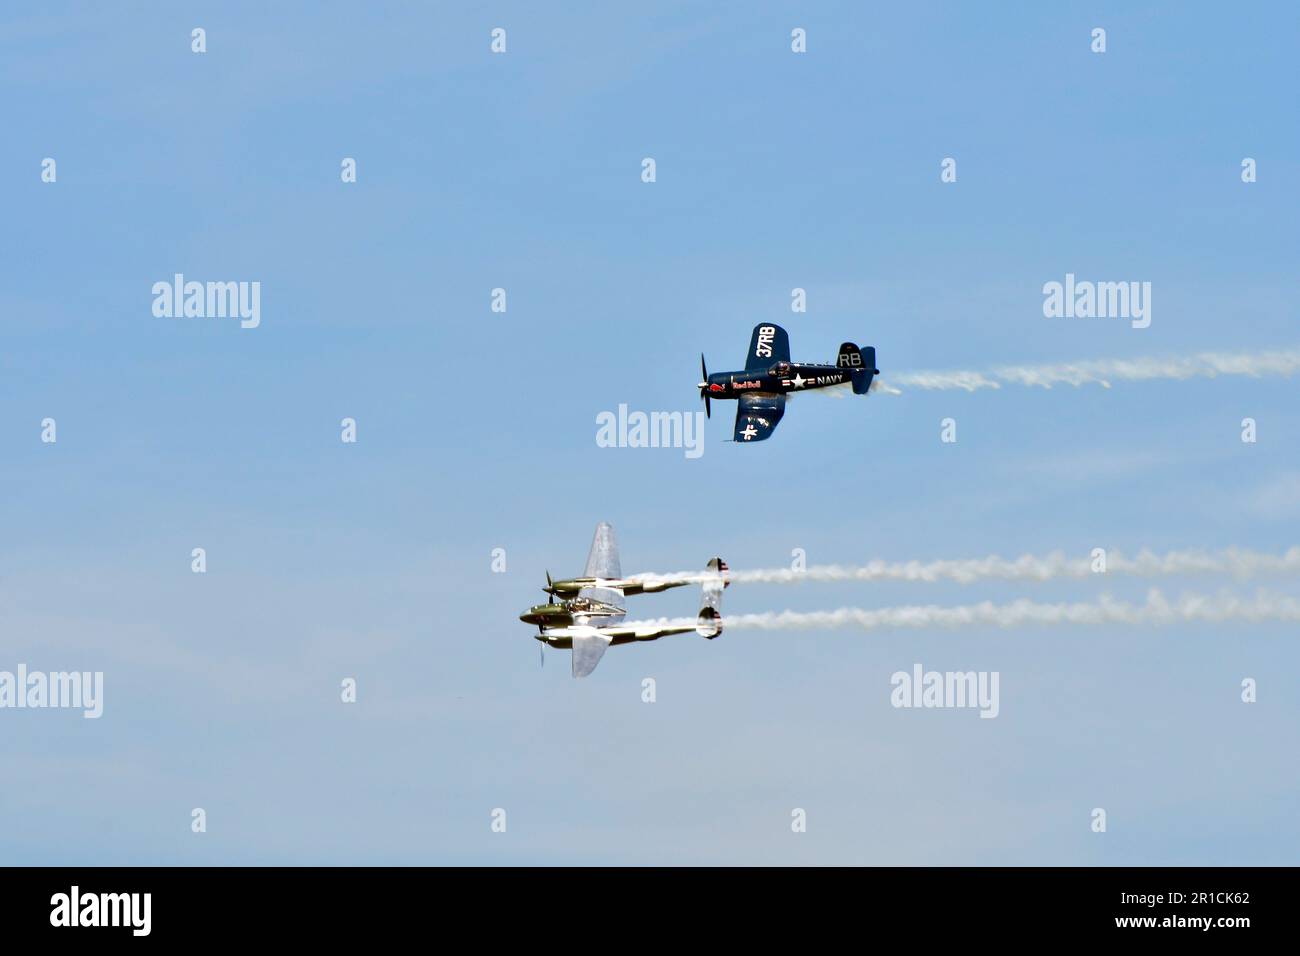 Zeltweg, Austria - September 03, 2022: Public airshow in Styria named Airpower 22, flight demonstration with two WWII fighter aircrafts, Chance Vought Stock Photo